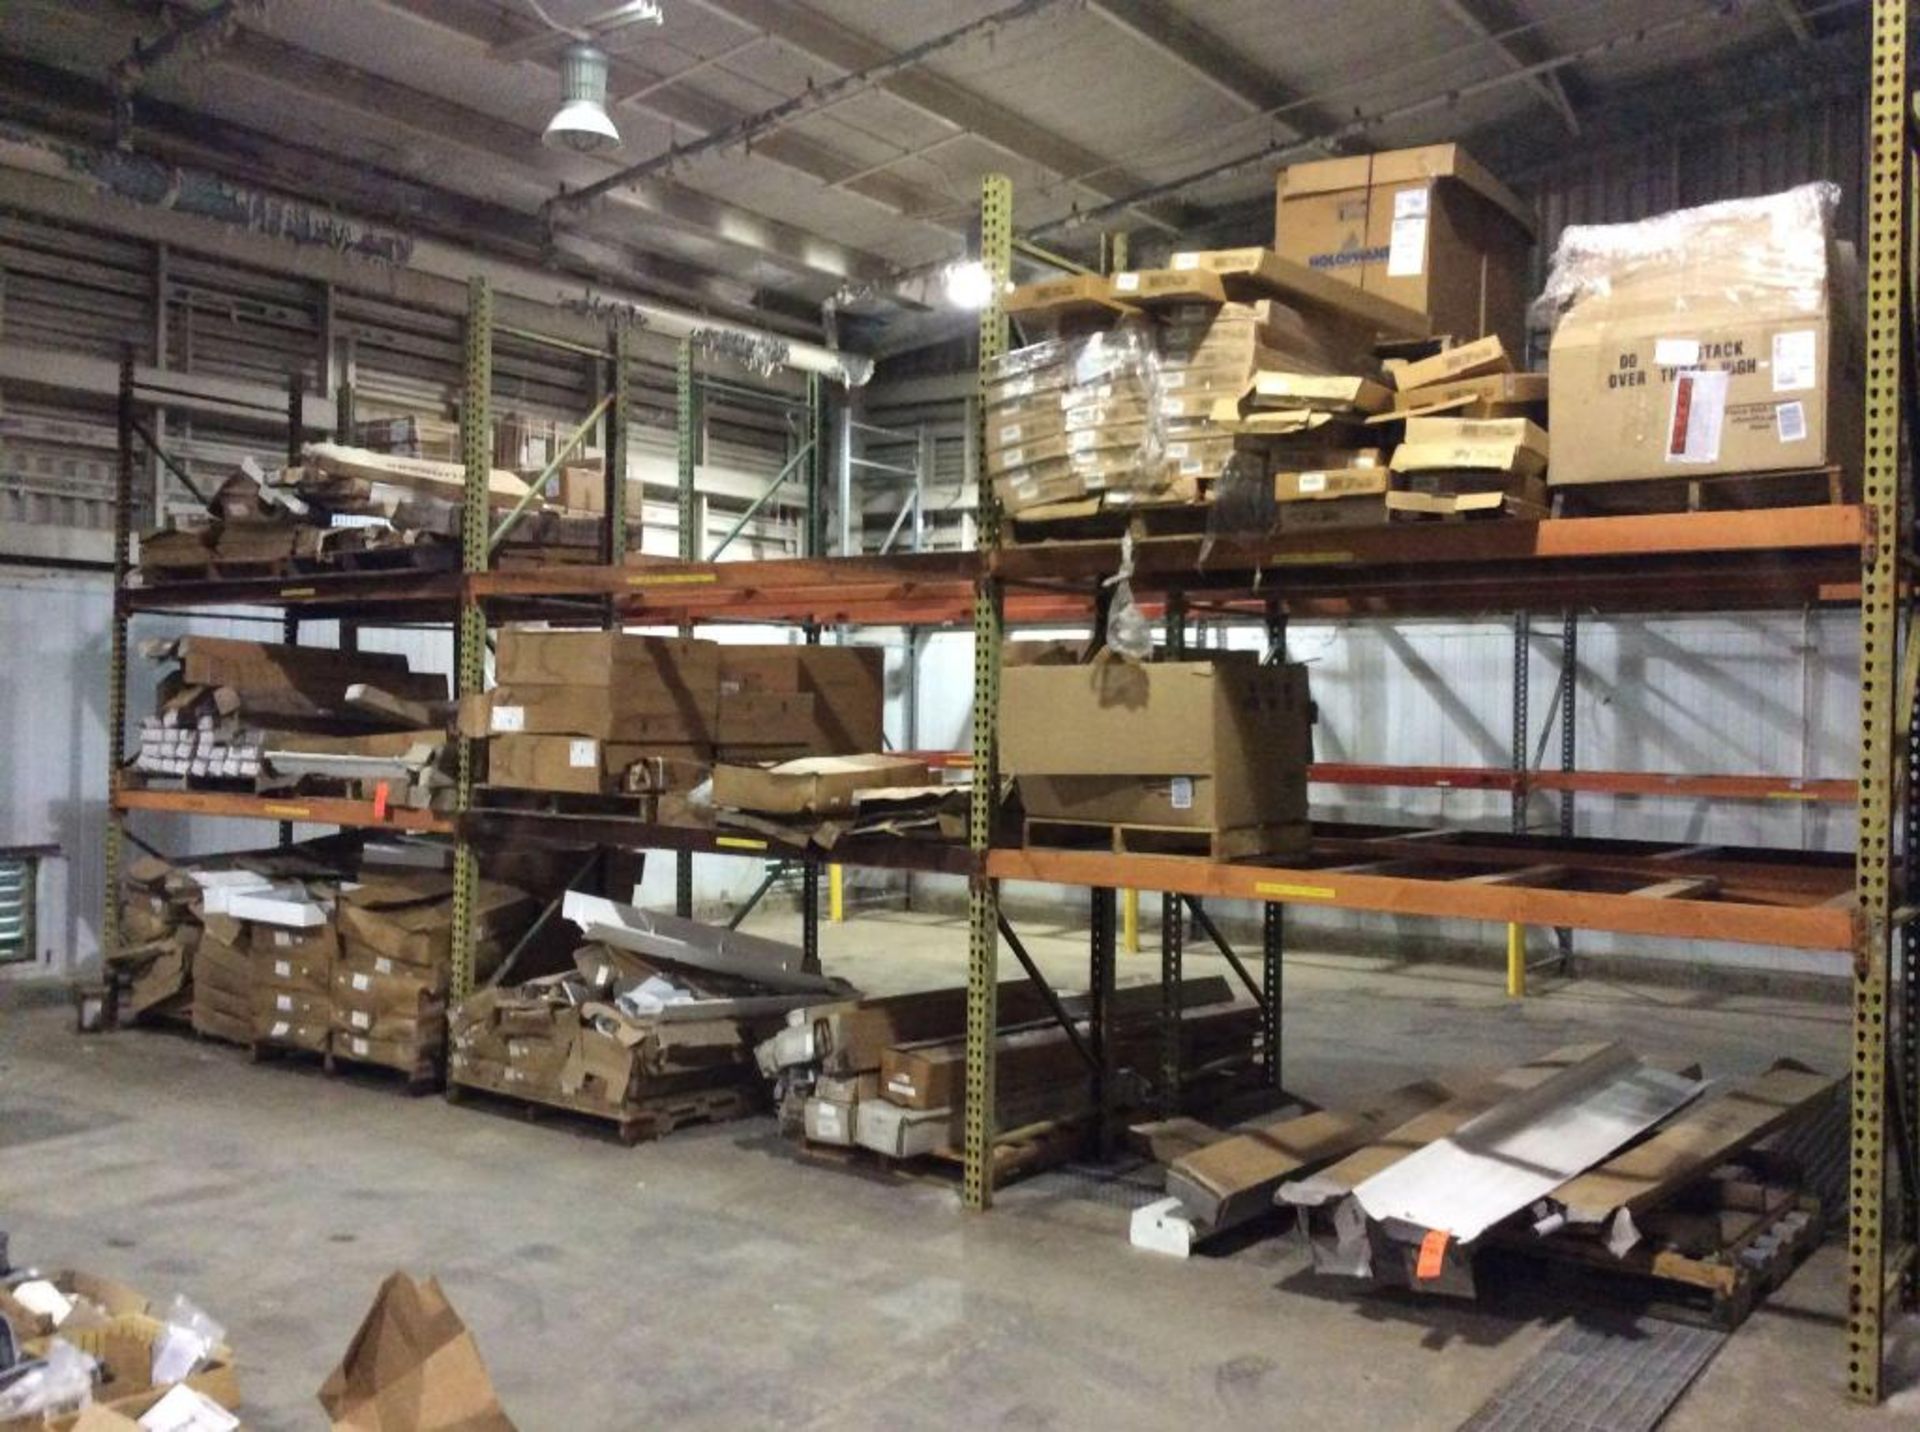 Lot of asst light fixtures and bulbs, contents of 17 pallets